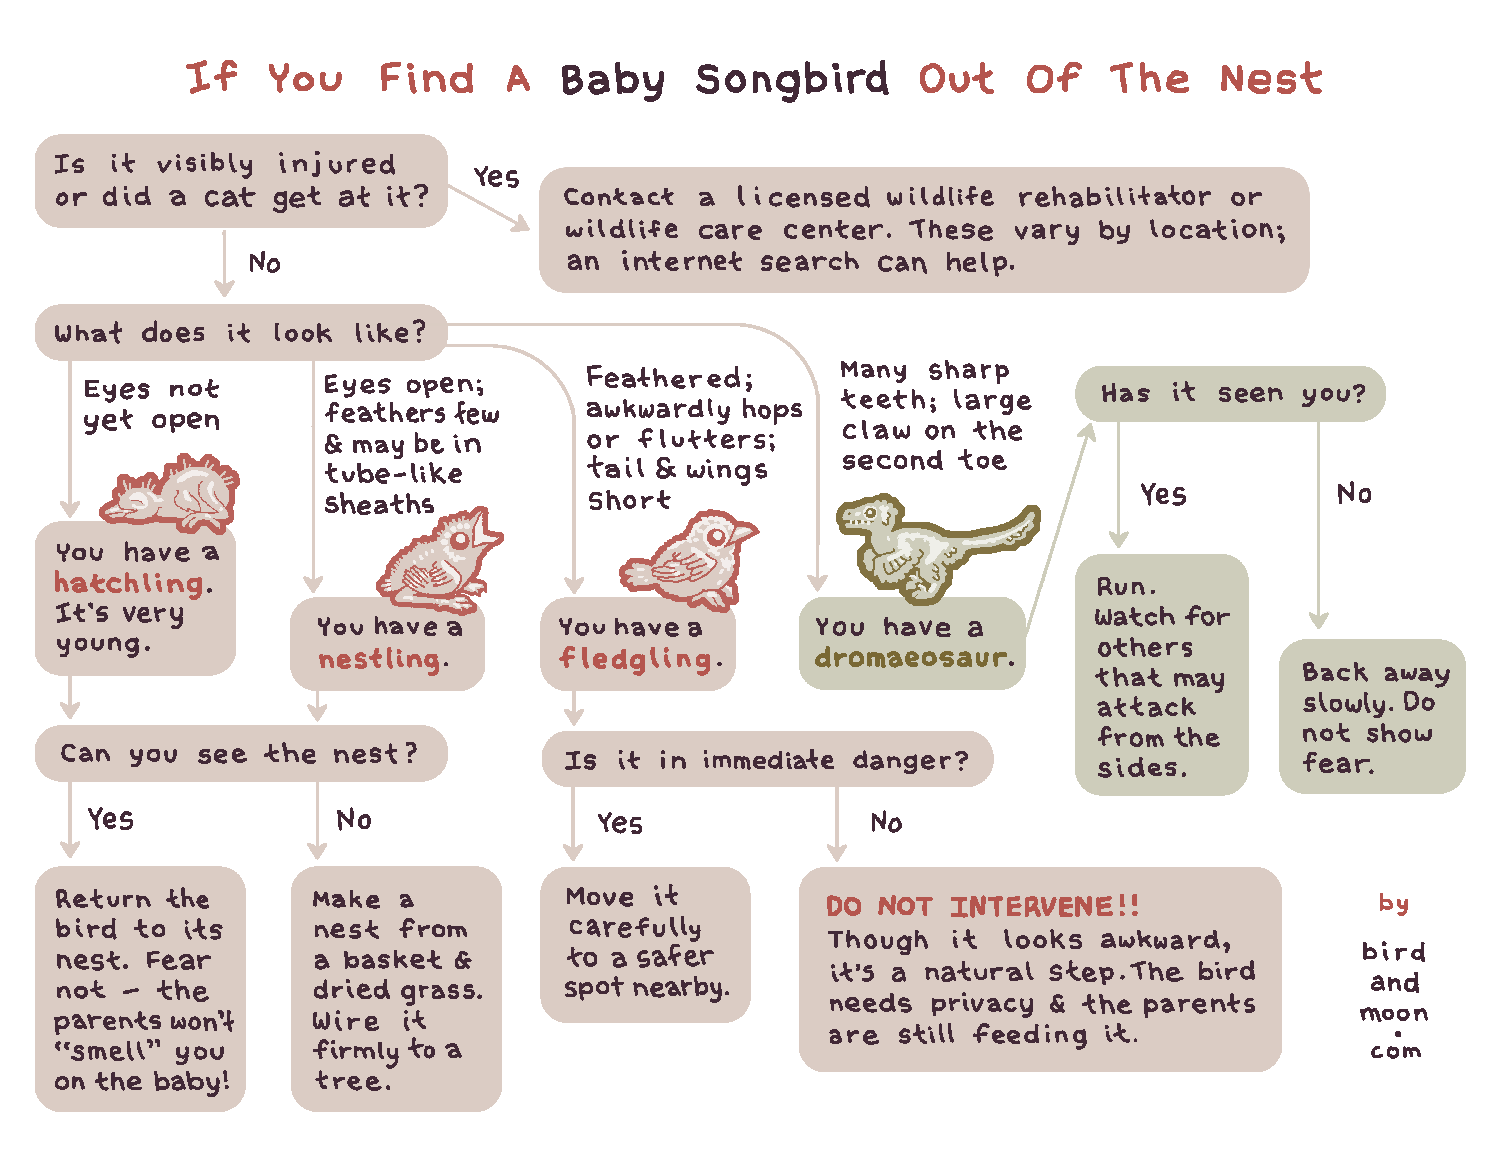 If You Find a Baby Songbird Out of the Nest